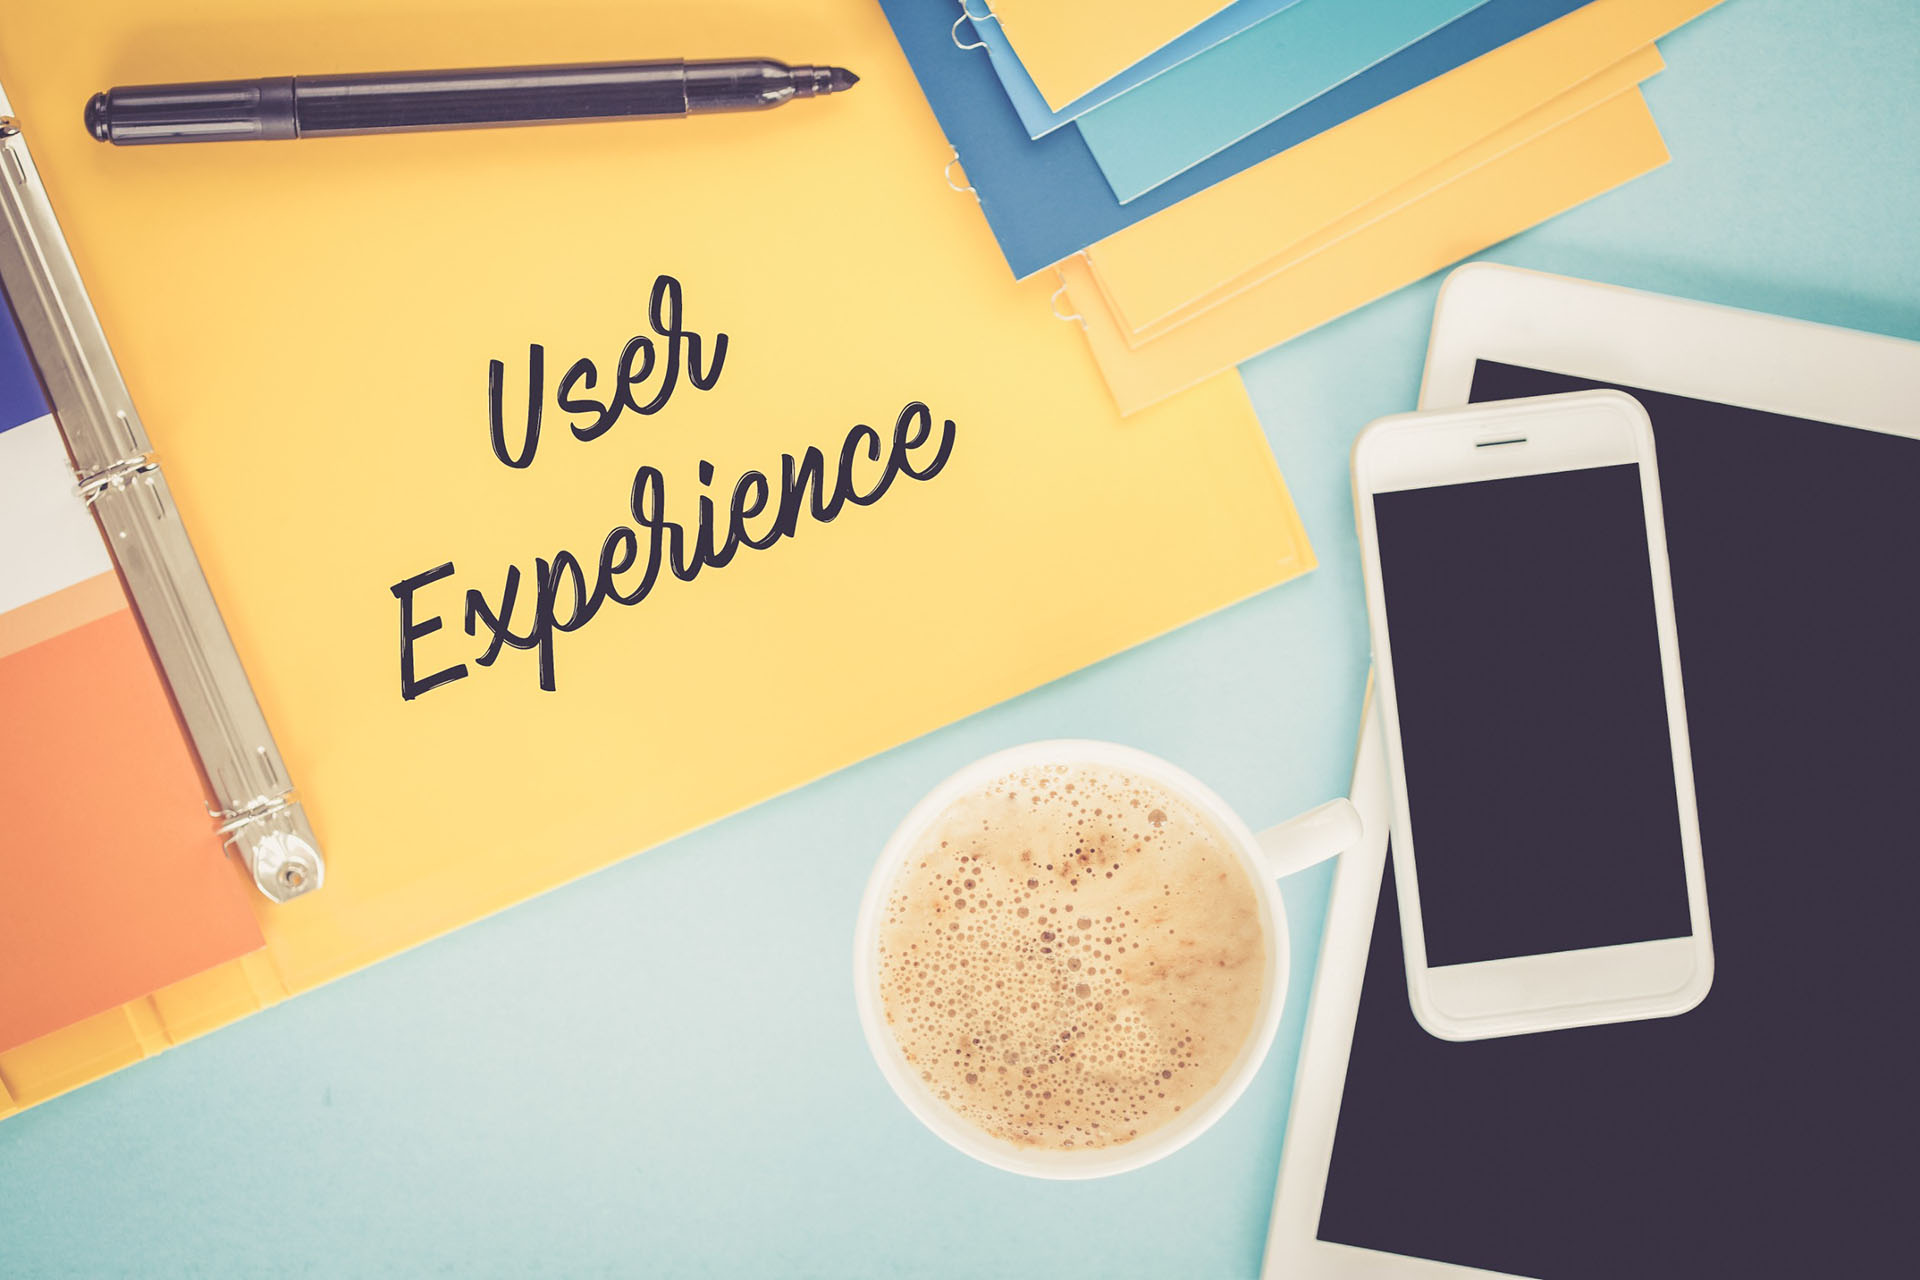 Words “user experience” written in cursive on a binder next to a cup of coffee, a phone, and an iPad.